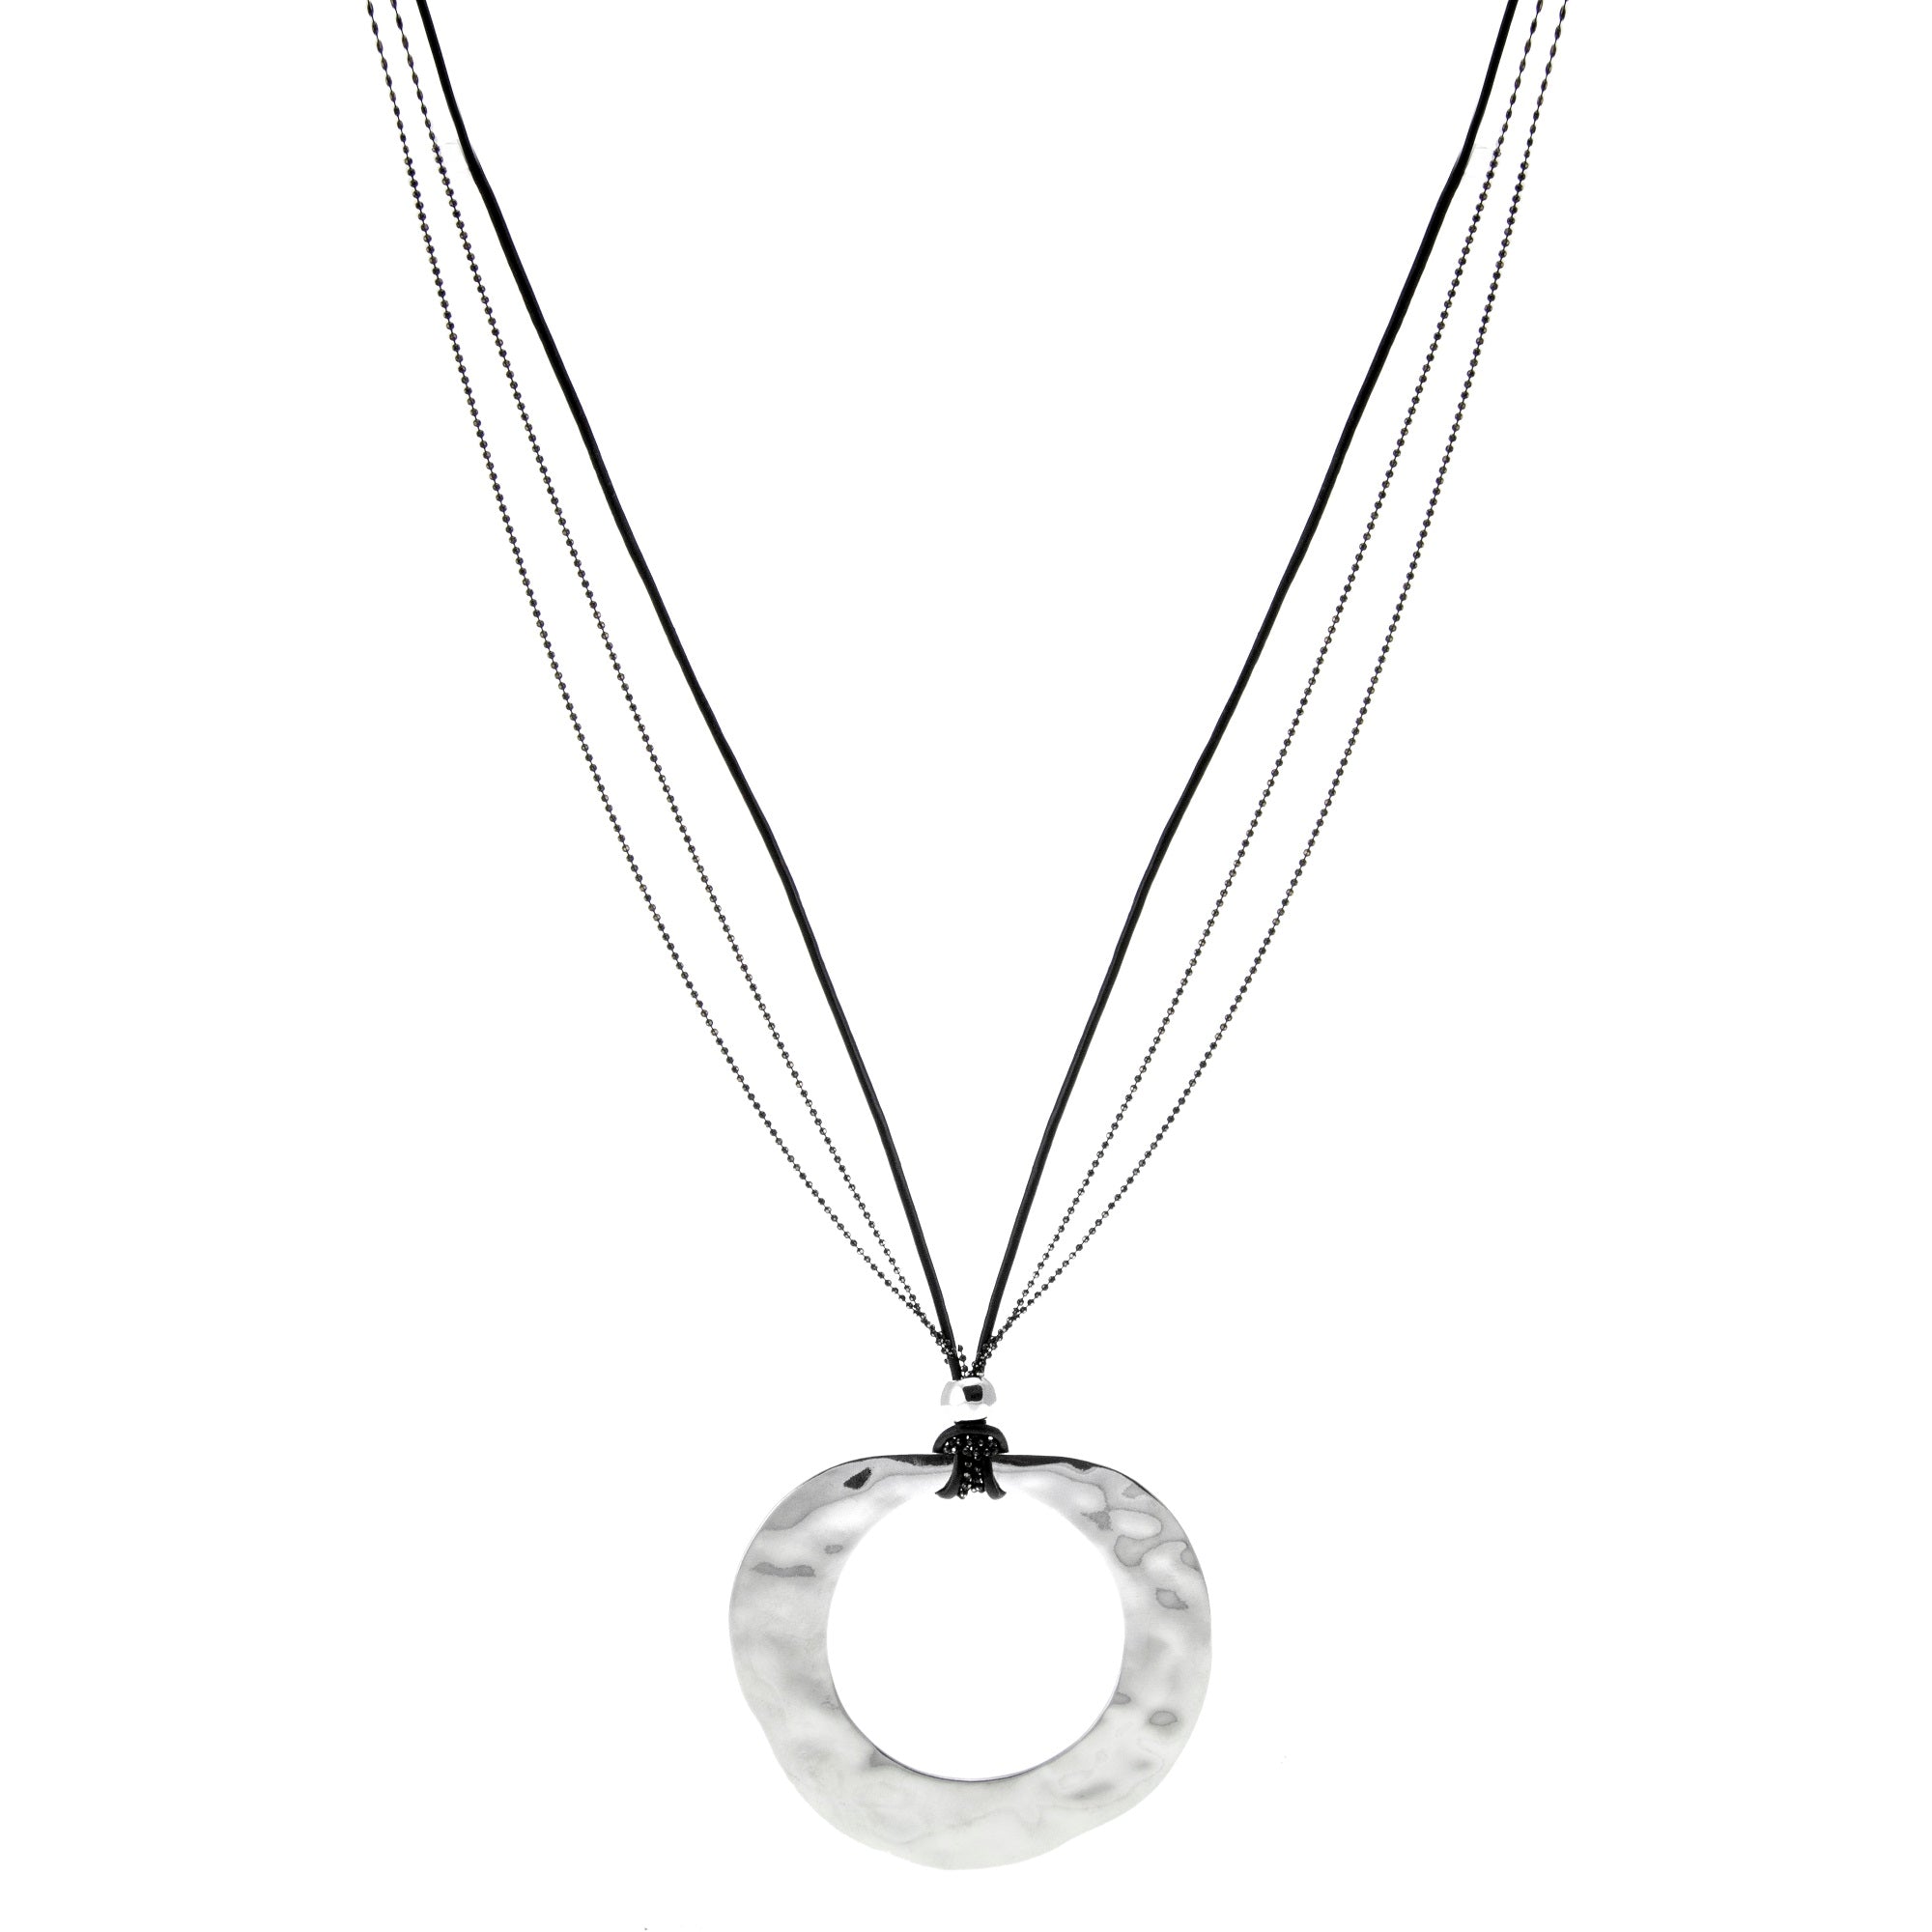 Merx shiny silver medallion fashion jewellery necklace on a corded chain 